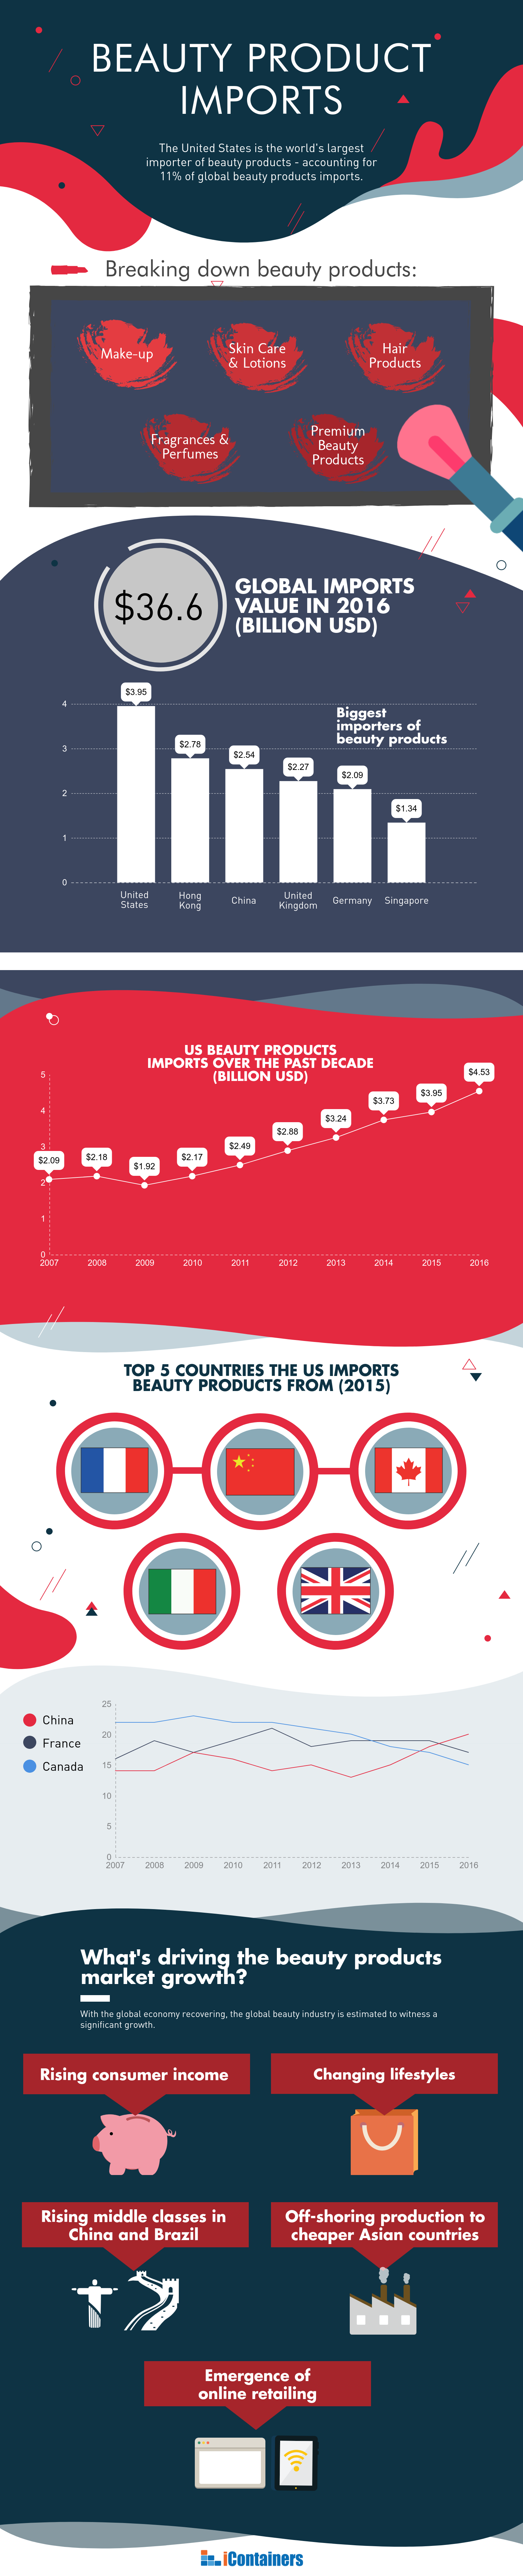 us-beauty-products-imports-infographic.png